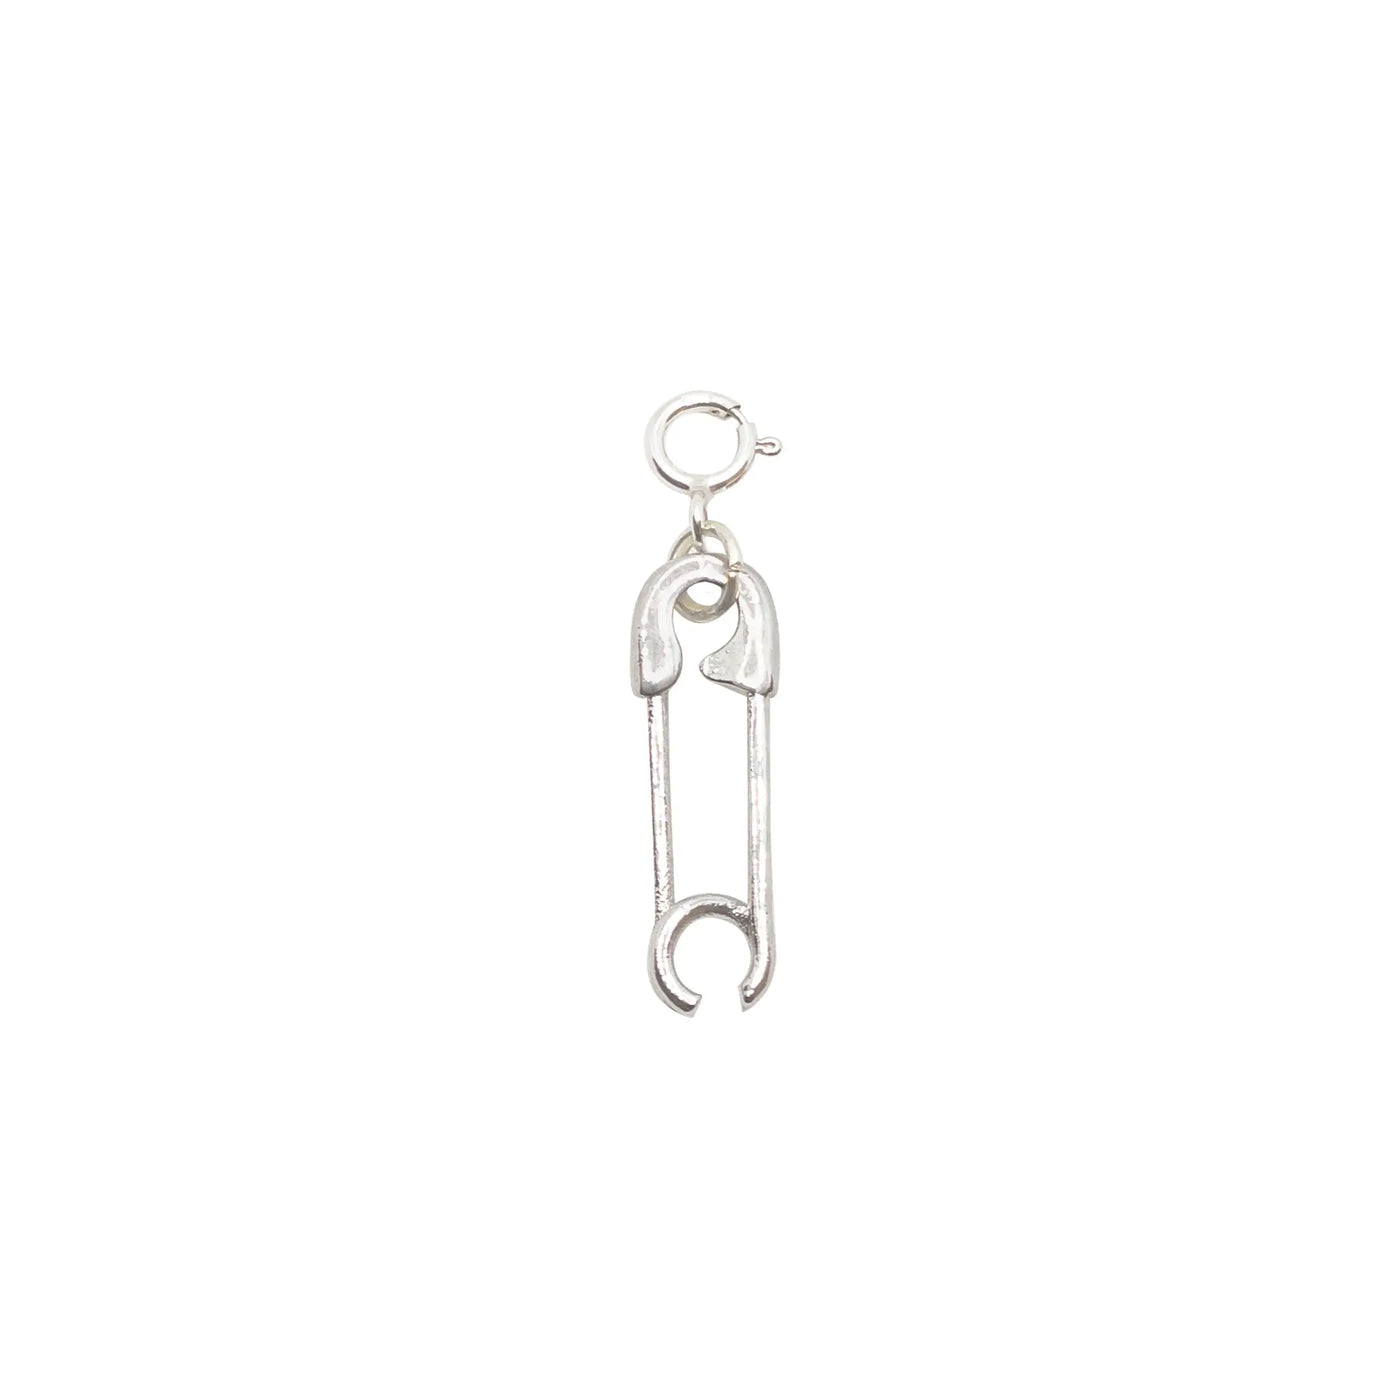 Safety Pin Silver Charm LaCkore Couture